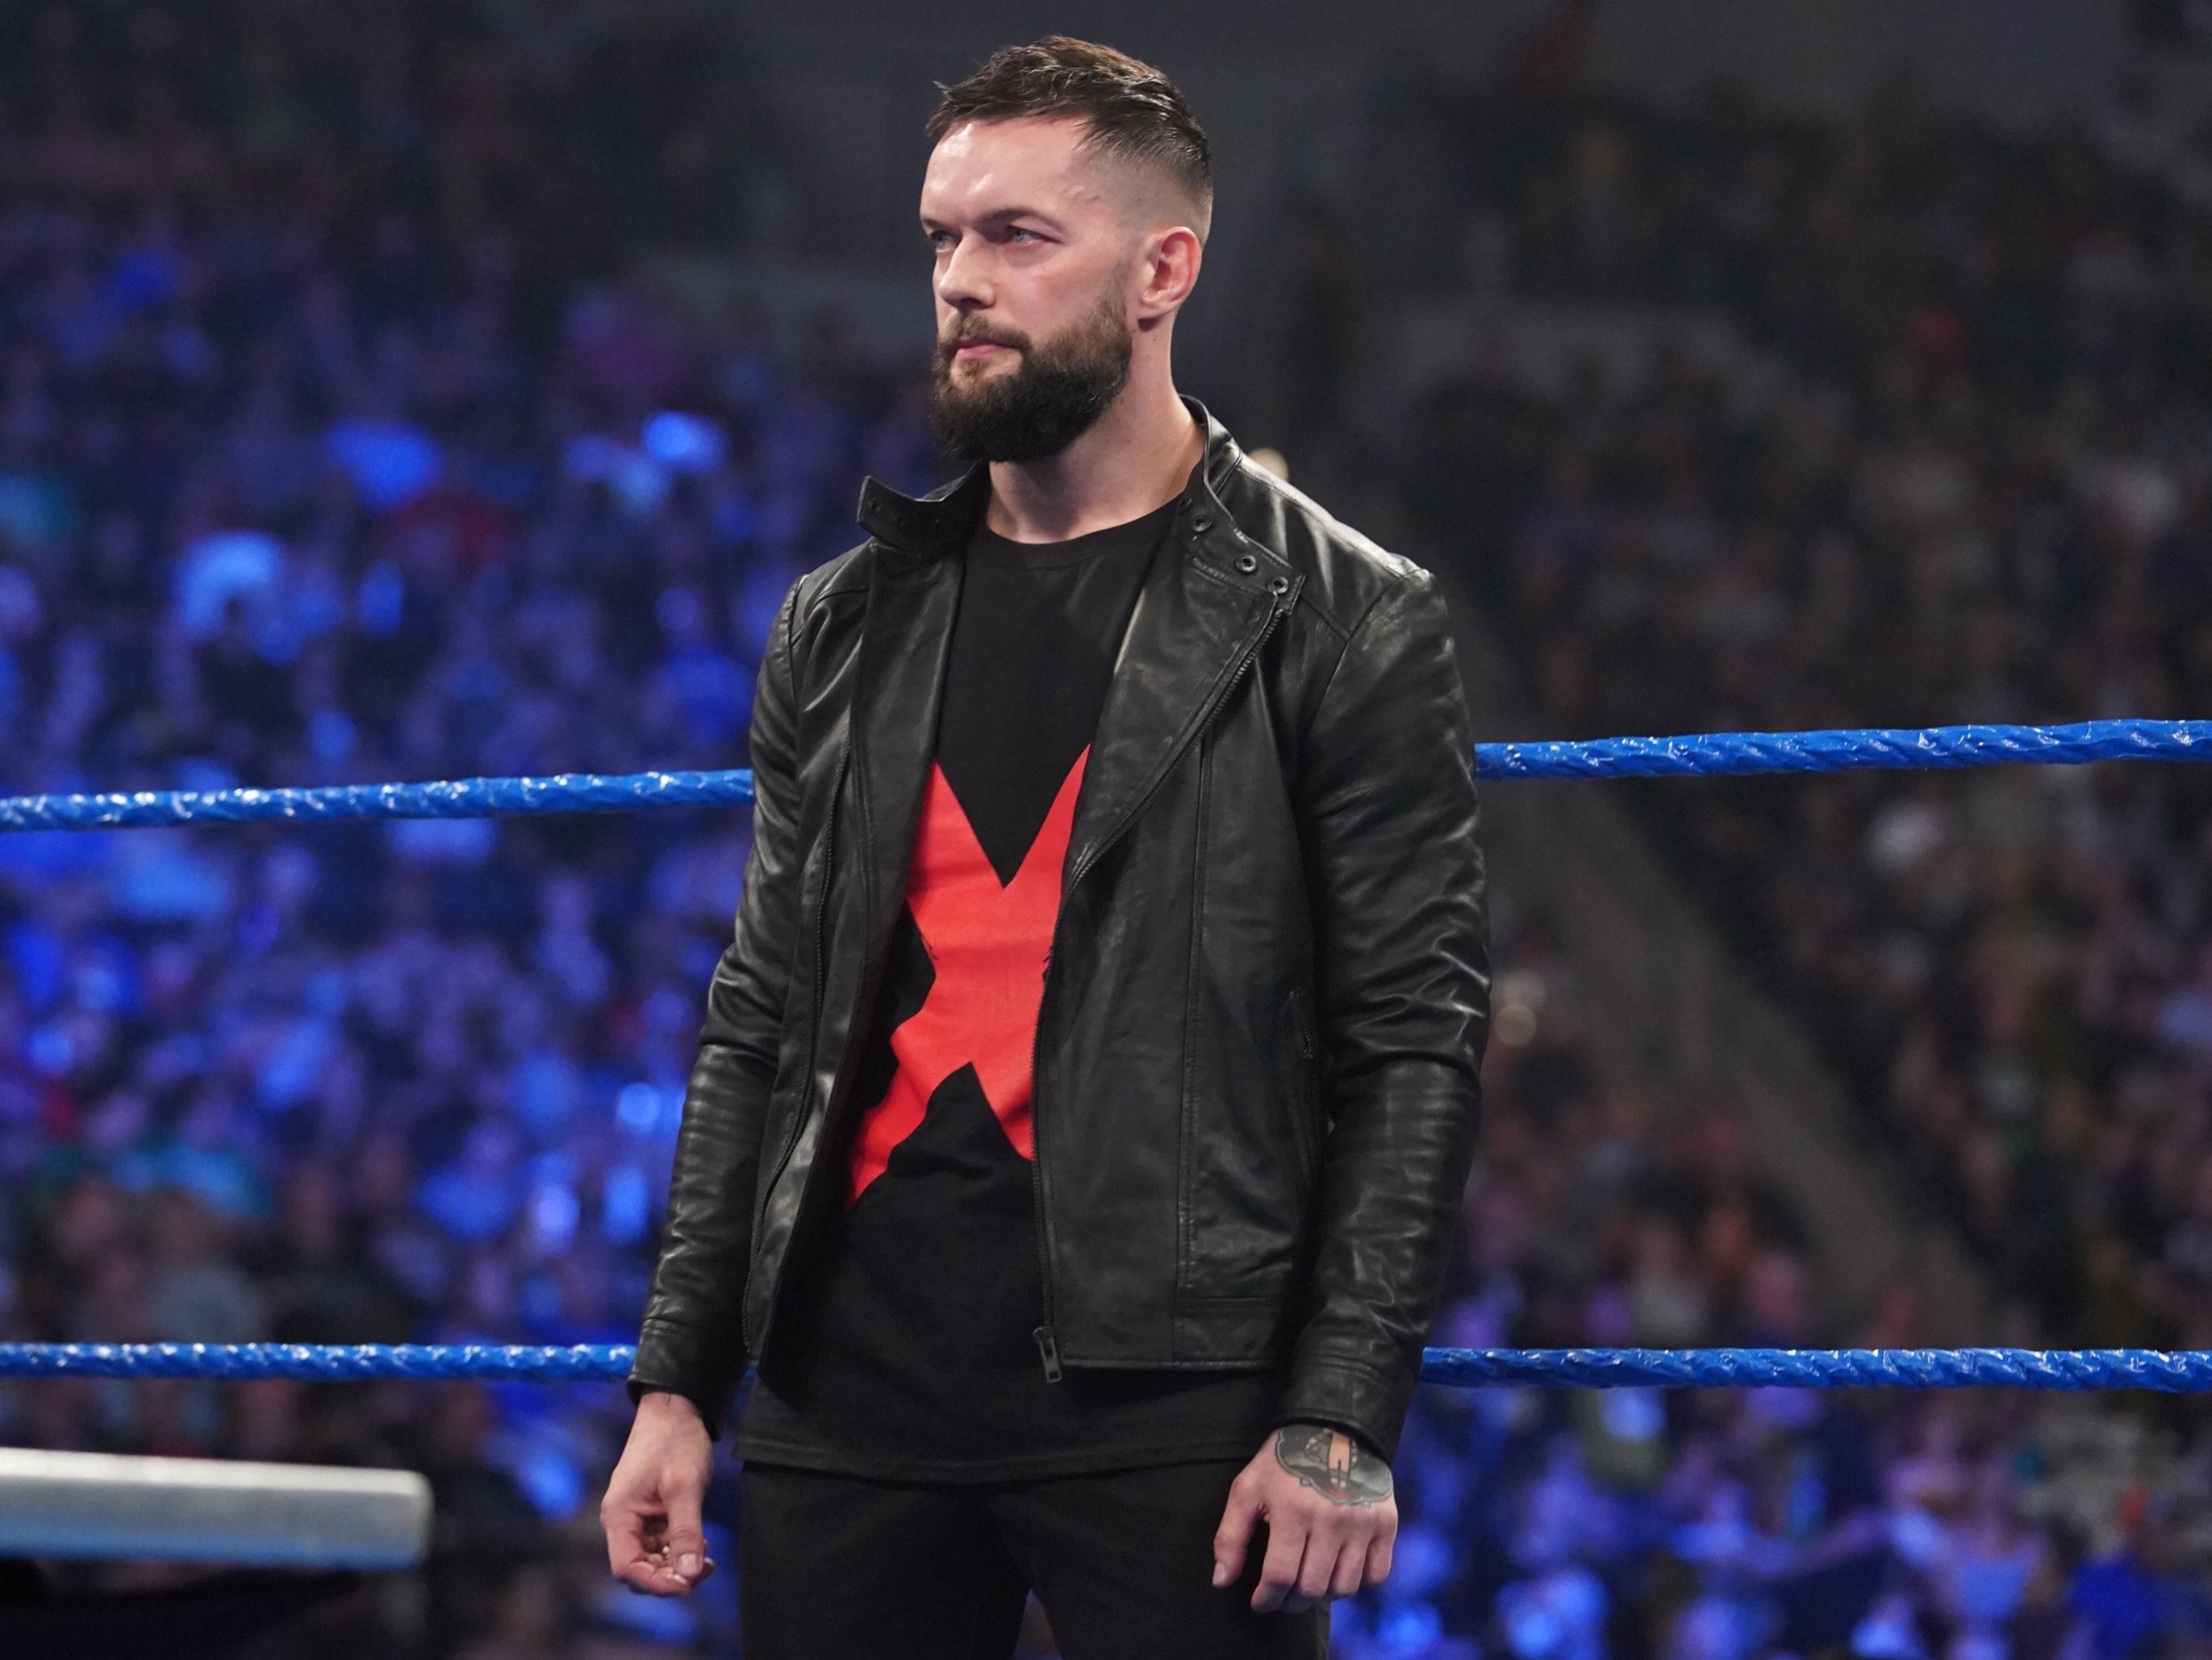 WWE star Finn Balor watches on in the ring on SmackDown